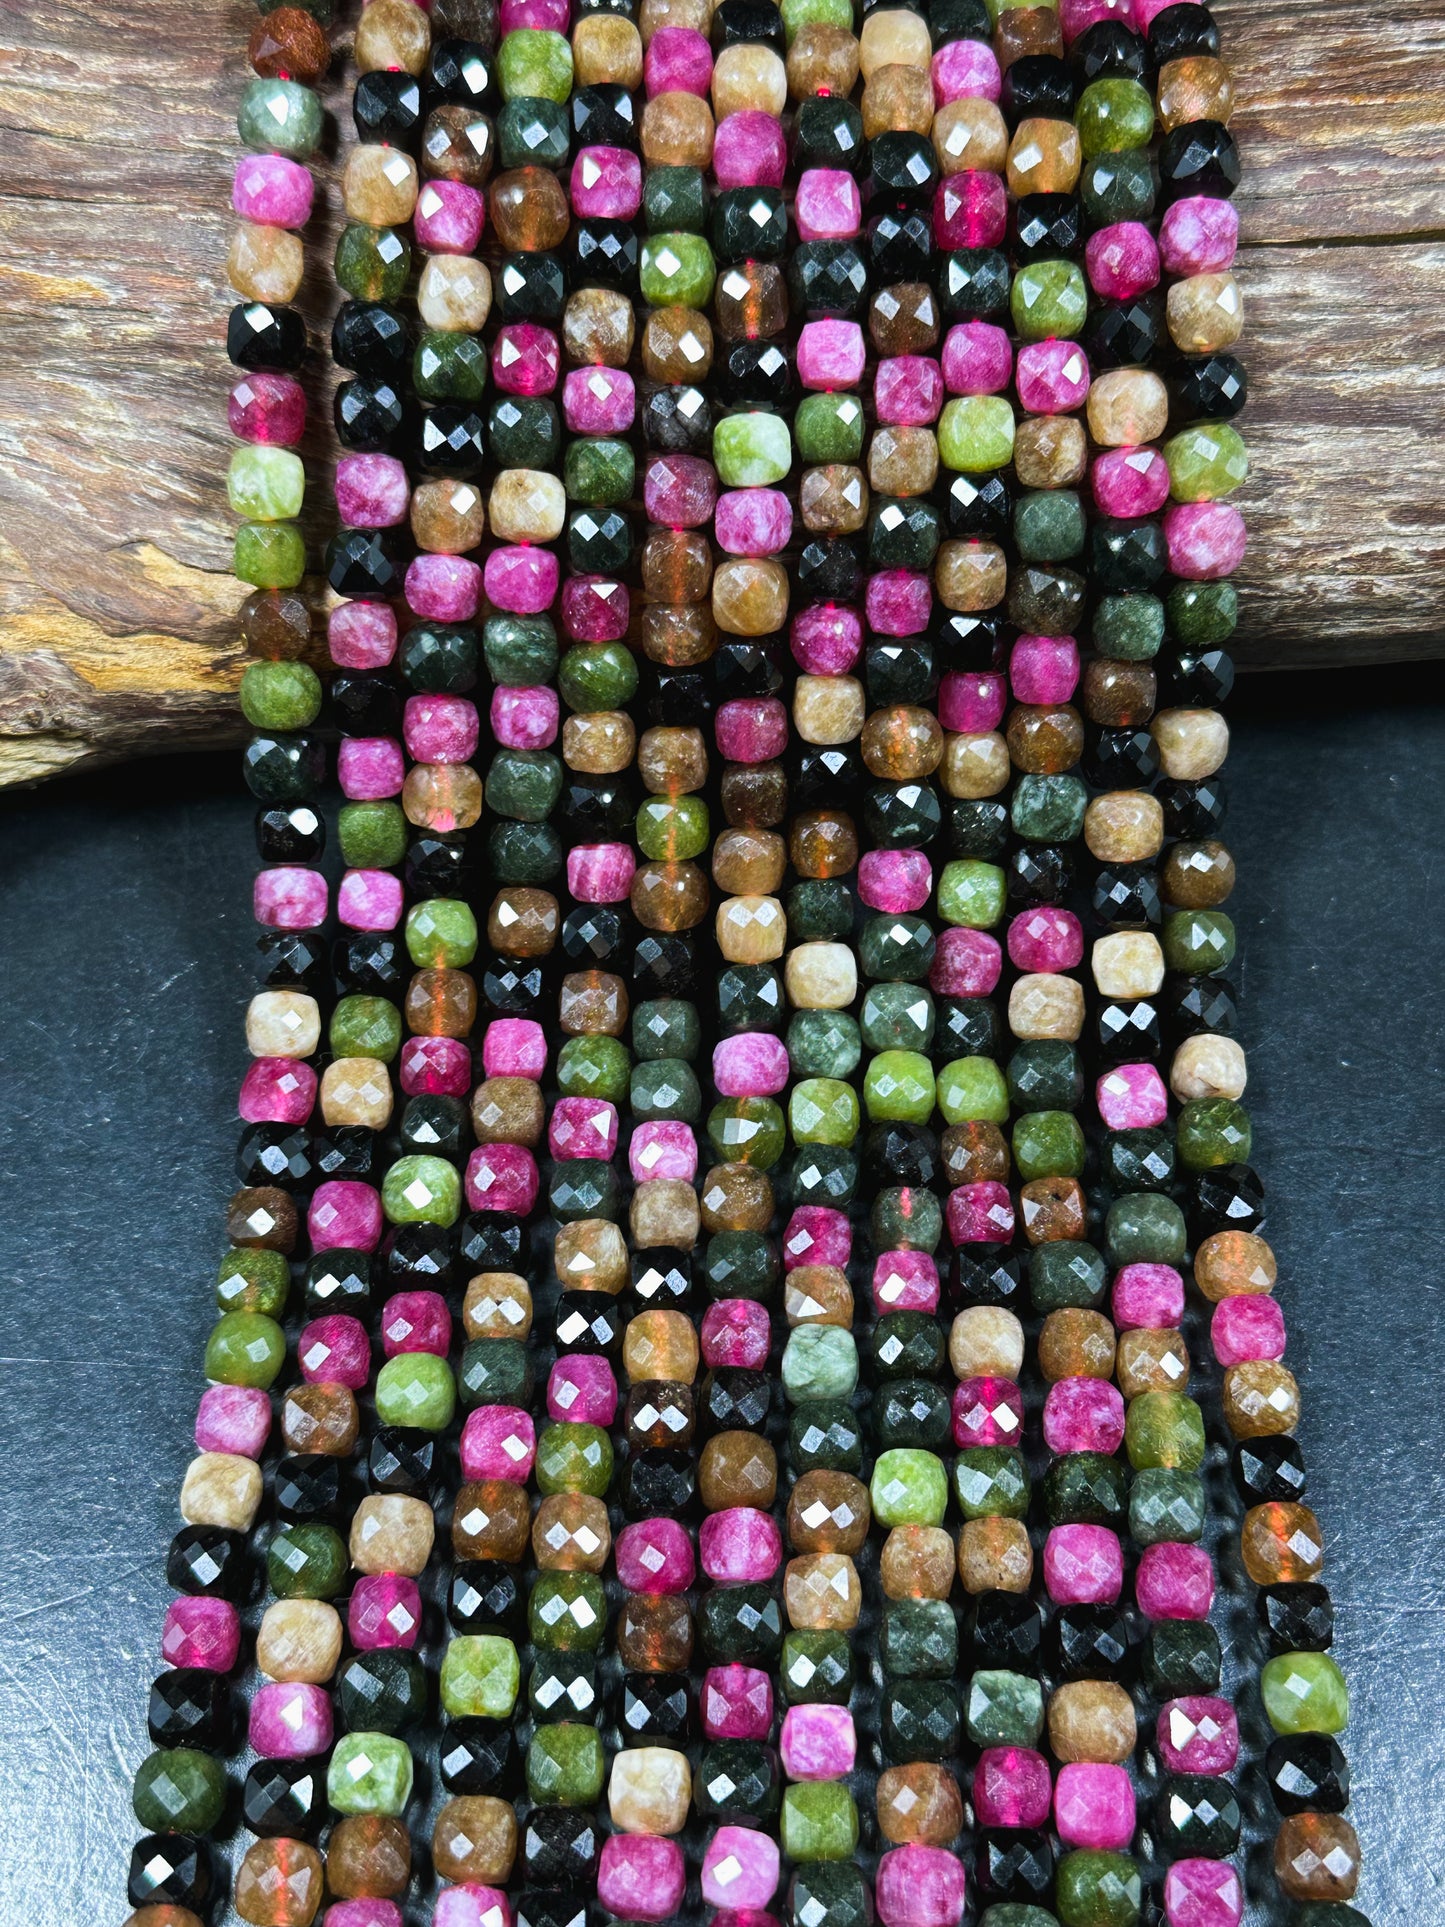 Natural Tourmaline Gemstone Bead Faceted 5mm 7mm Cube Shape, Beautiful Multicolor Black Pink Green Brown Tourmaline Bead, Full 15.5" Strand